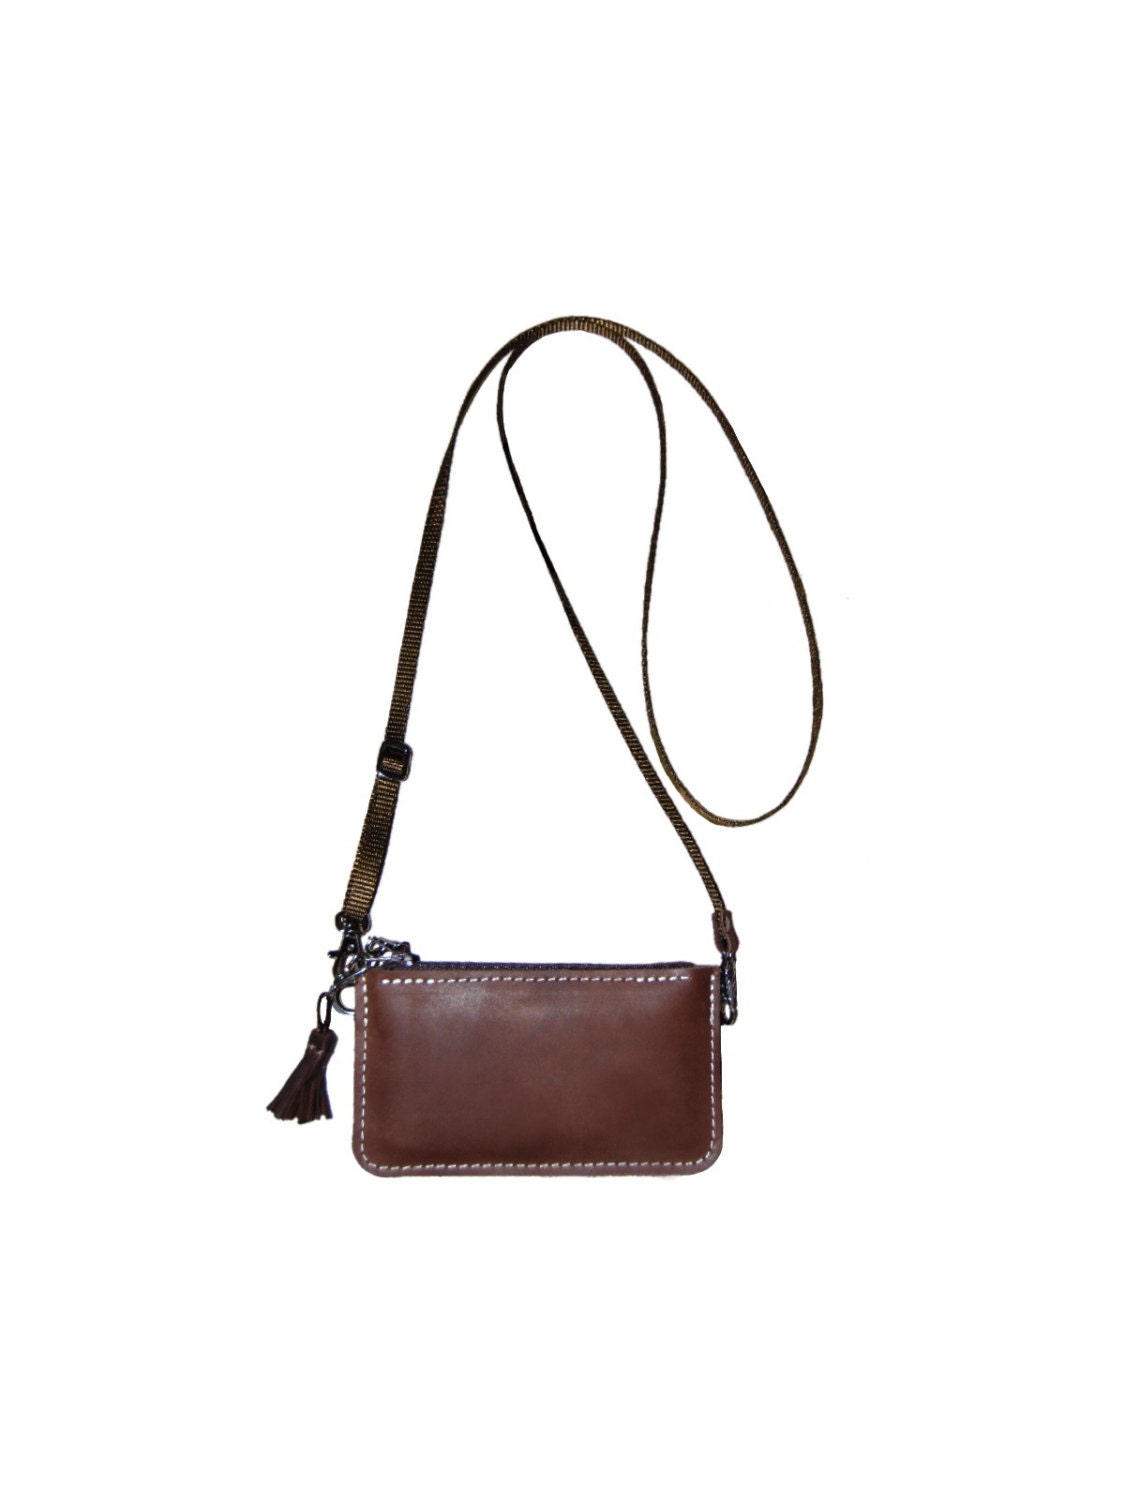 iPhone 6 Plus Leather Crossbody Purse iPhone 6 by ChiqueFabrique